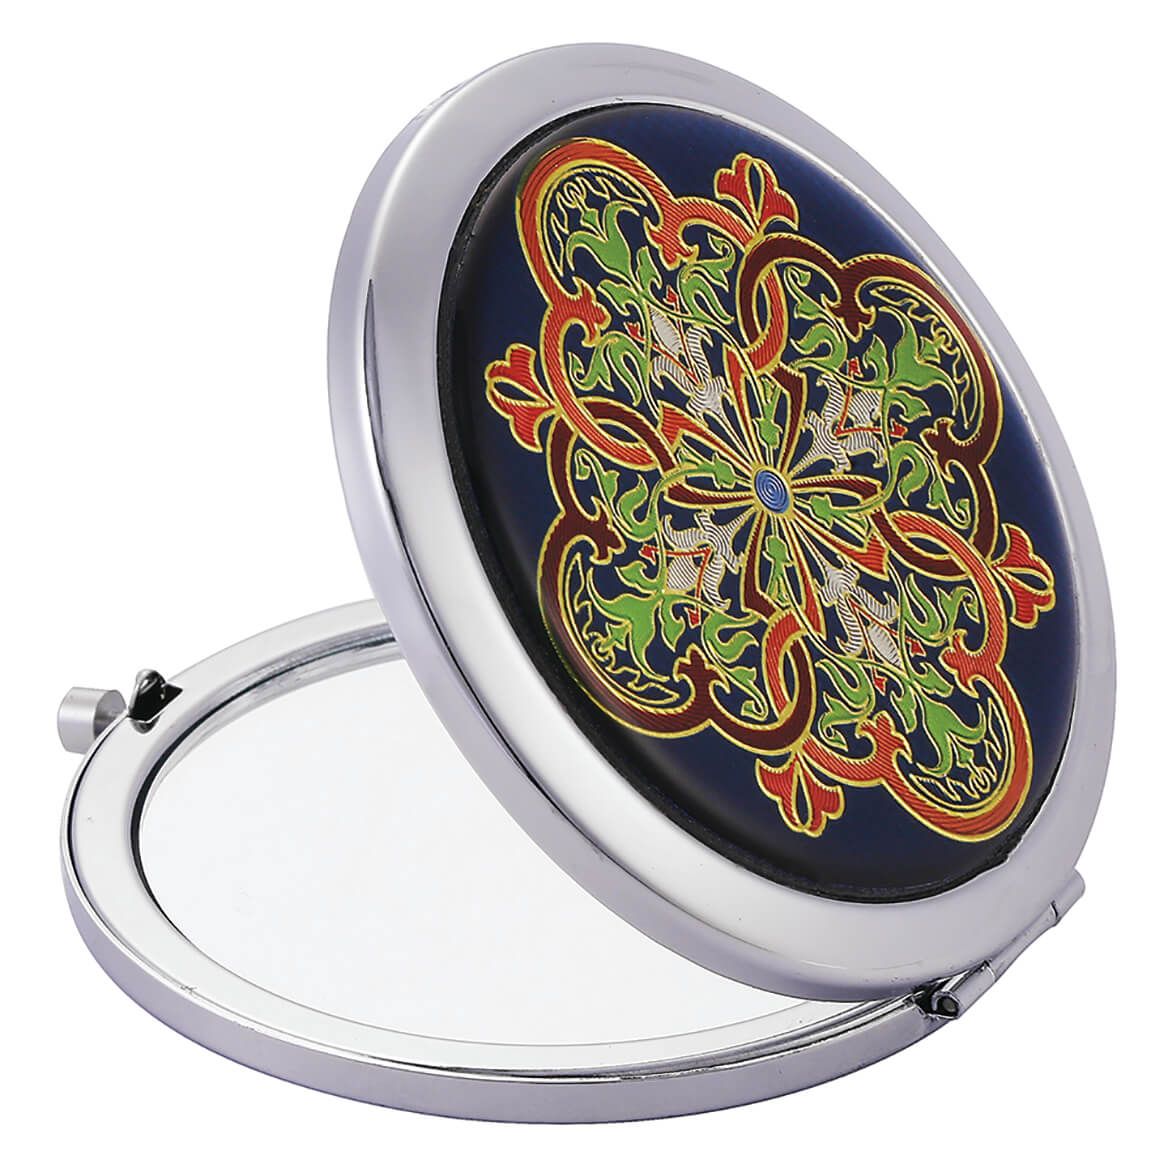 Dual Magnifying Compact Mirror + '-' + 371091